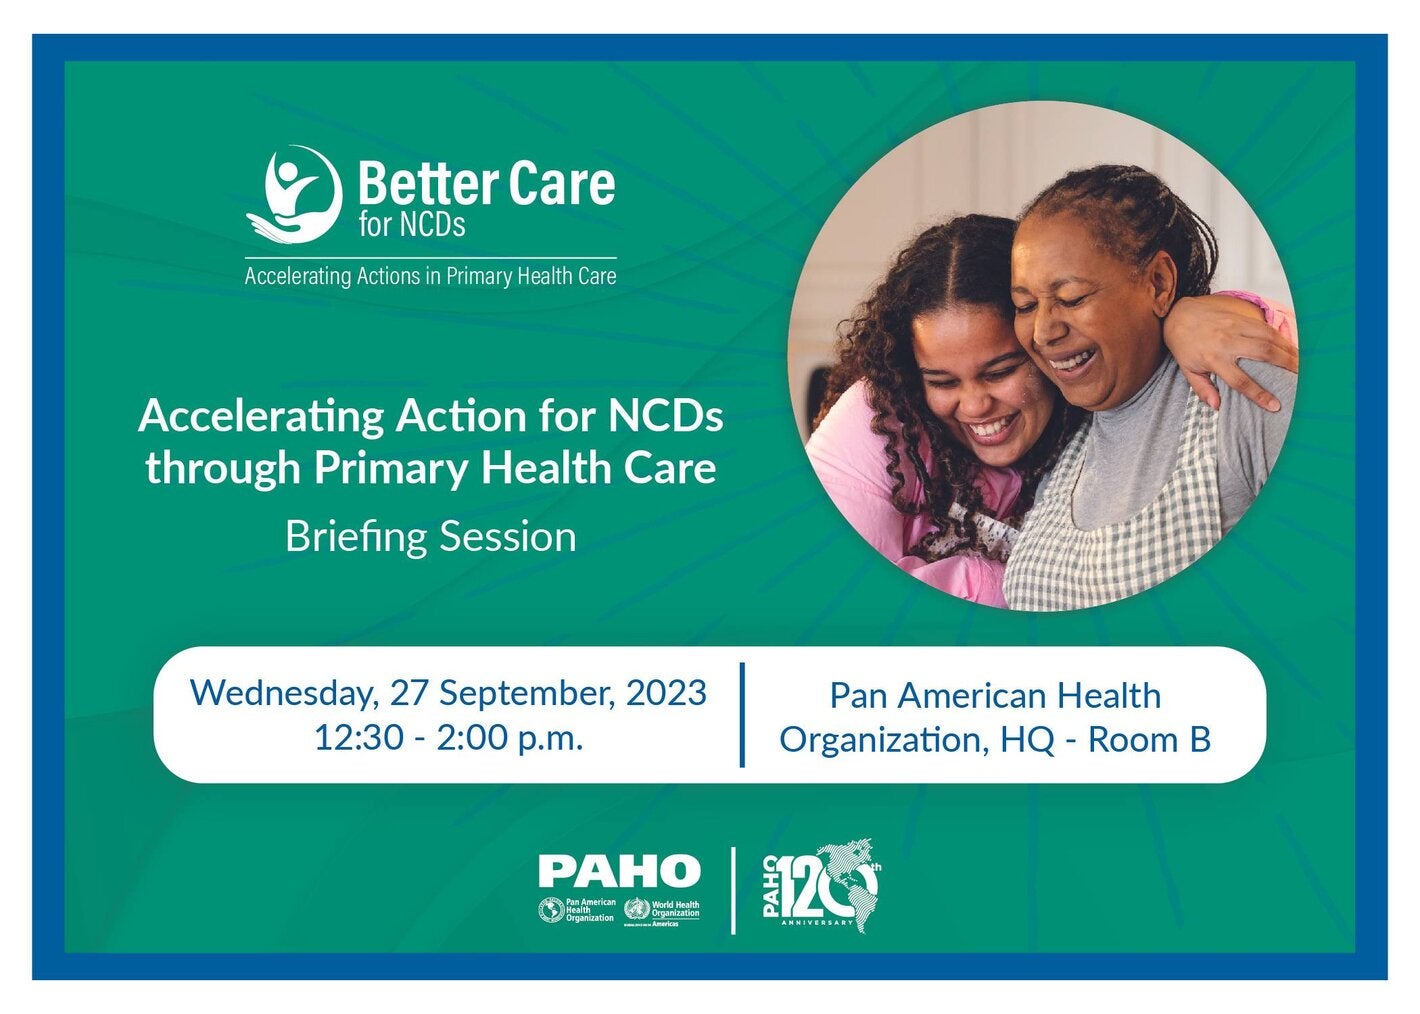 Accelerating Actions for NCDs through Primary Health Care